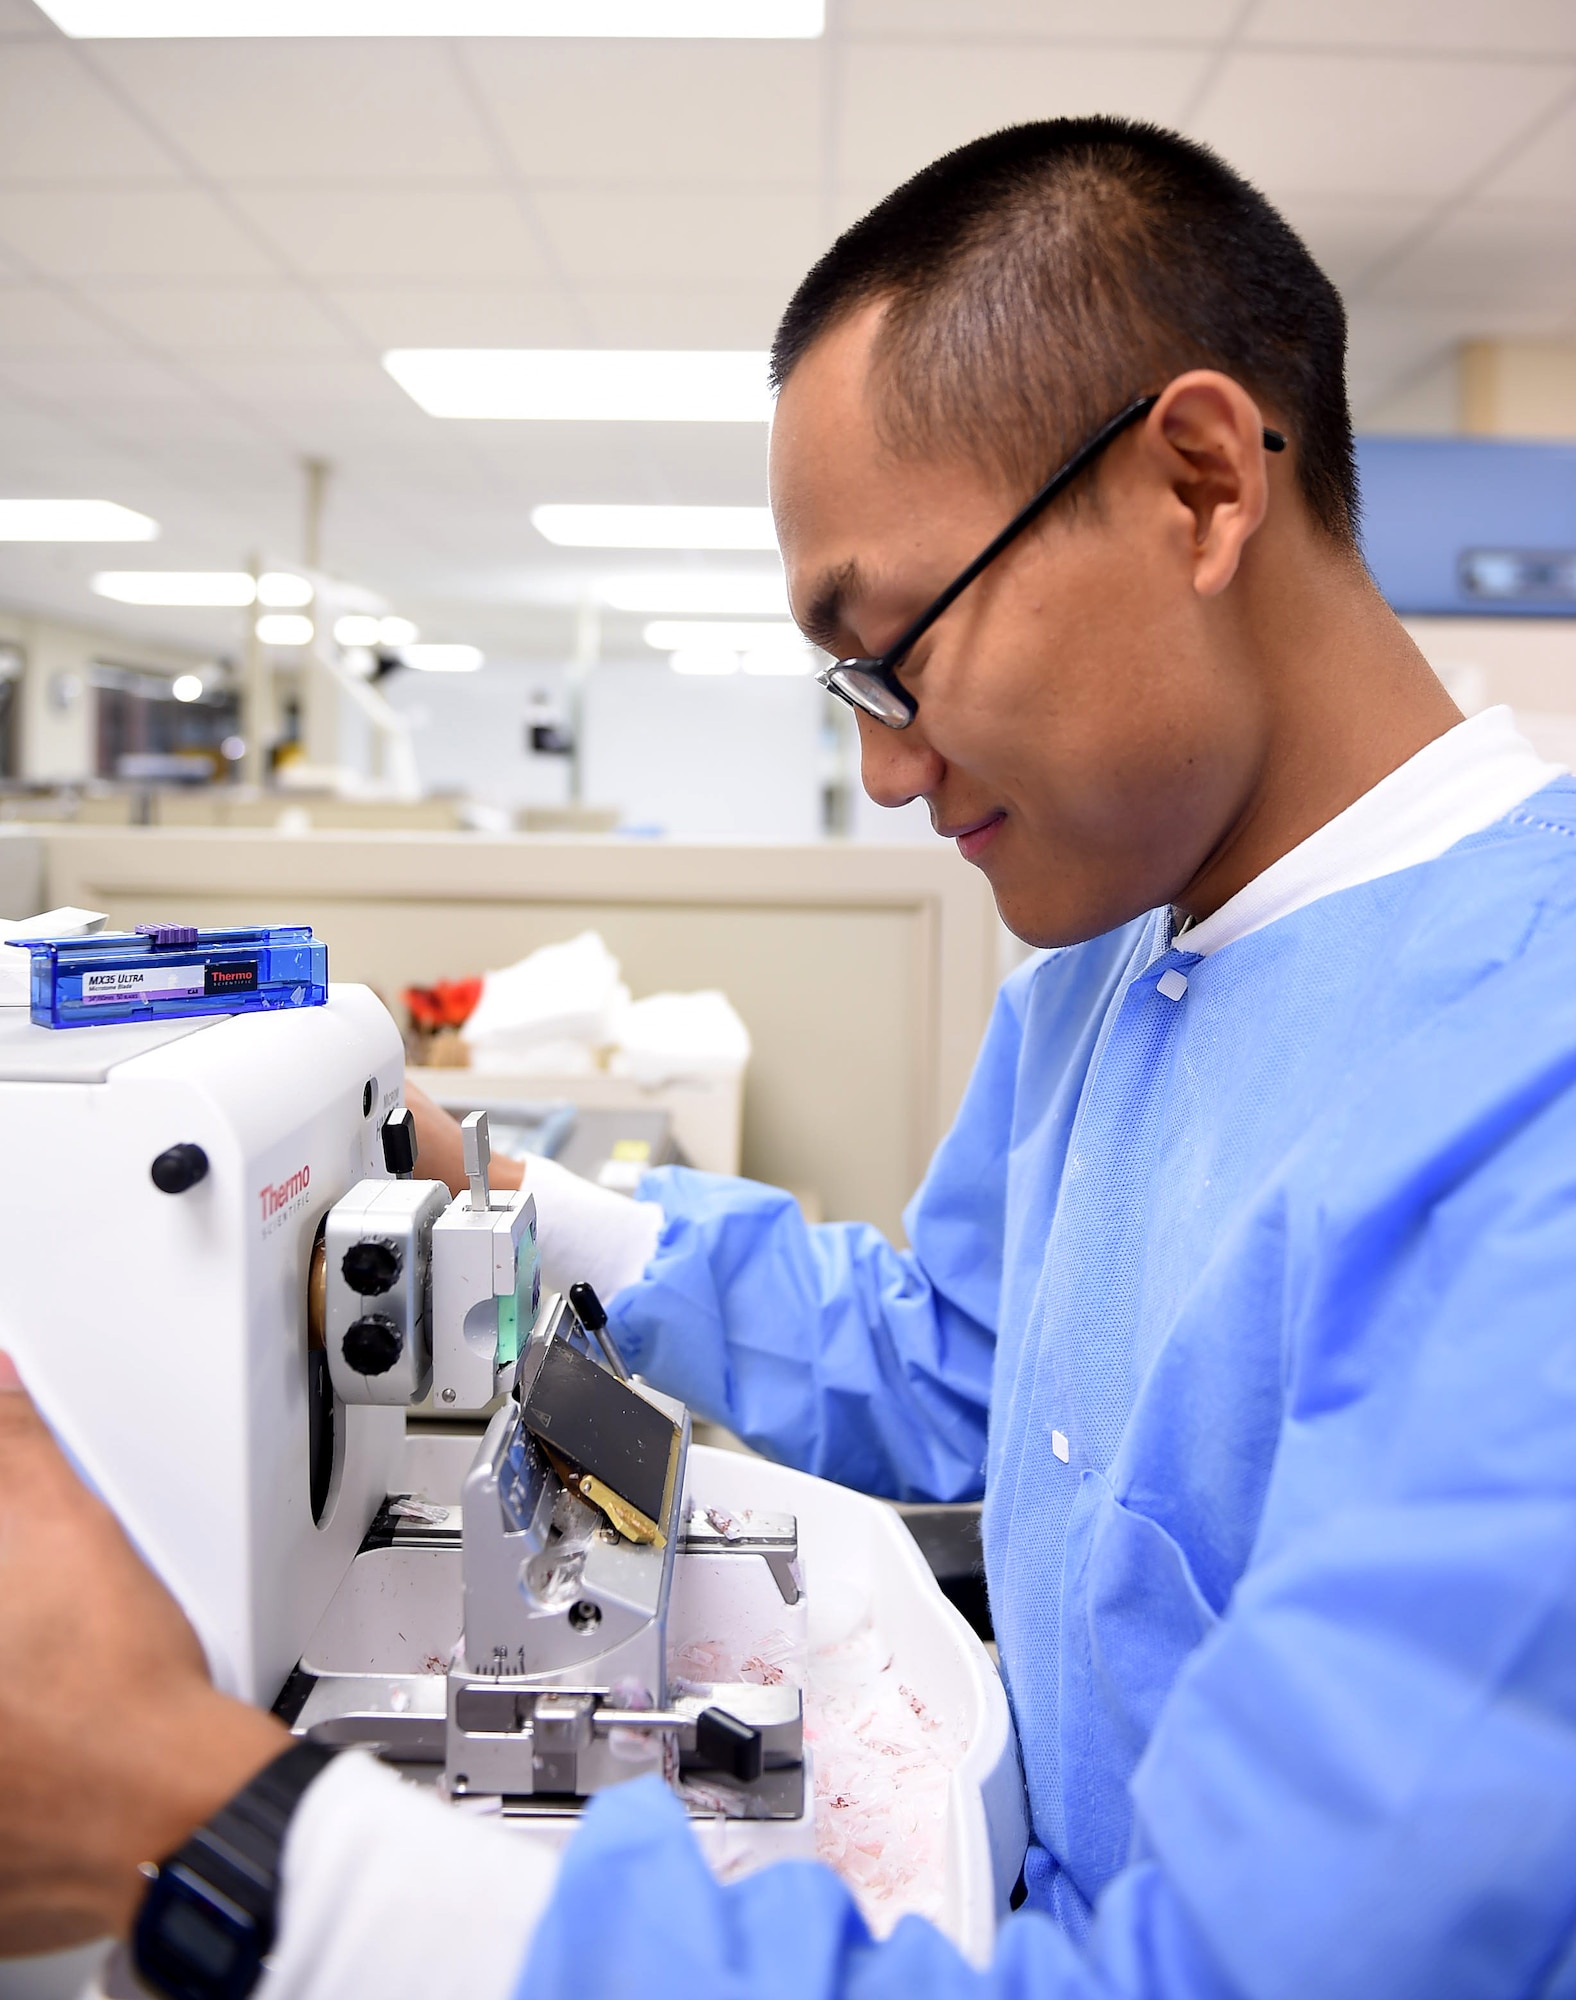 Senior Airman Biak Sang, a 959th Clinical Support Squadron histology technician, preps a block tissue sample for testing at the San Antonio Military Medical Center, Joint Base San Antonio-Fort Sam Houston, Jan. 13, 2017. The pathology lab is part of the 959th Medical Group, the third largest medical group in the Air Force Medical Service. The group is fully integrated with Army and civilian personnel at SAMMC, supporting operations at a 425-bed facility and the only Level 1 Trauma Center in the Department of Defense (U.S. Air Force photo/Staff Sgt. Jerilyn Quintanilla) 